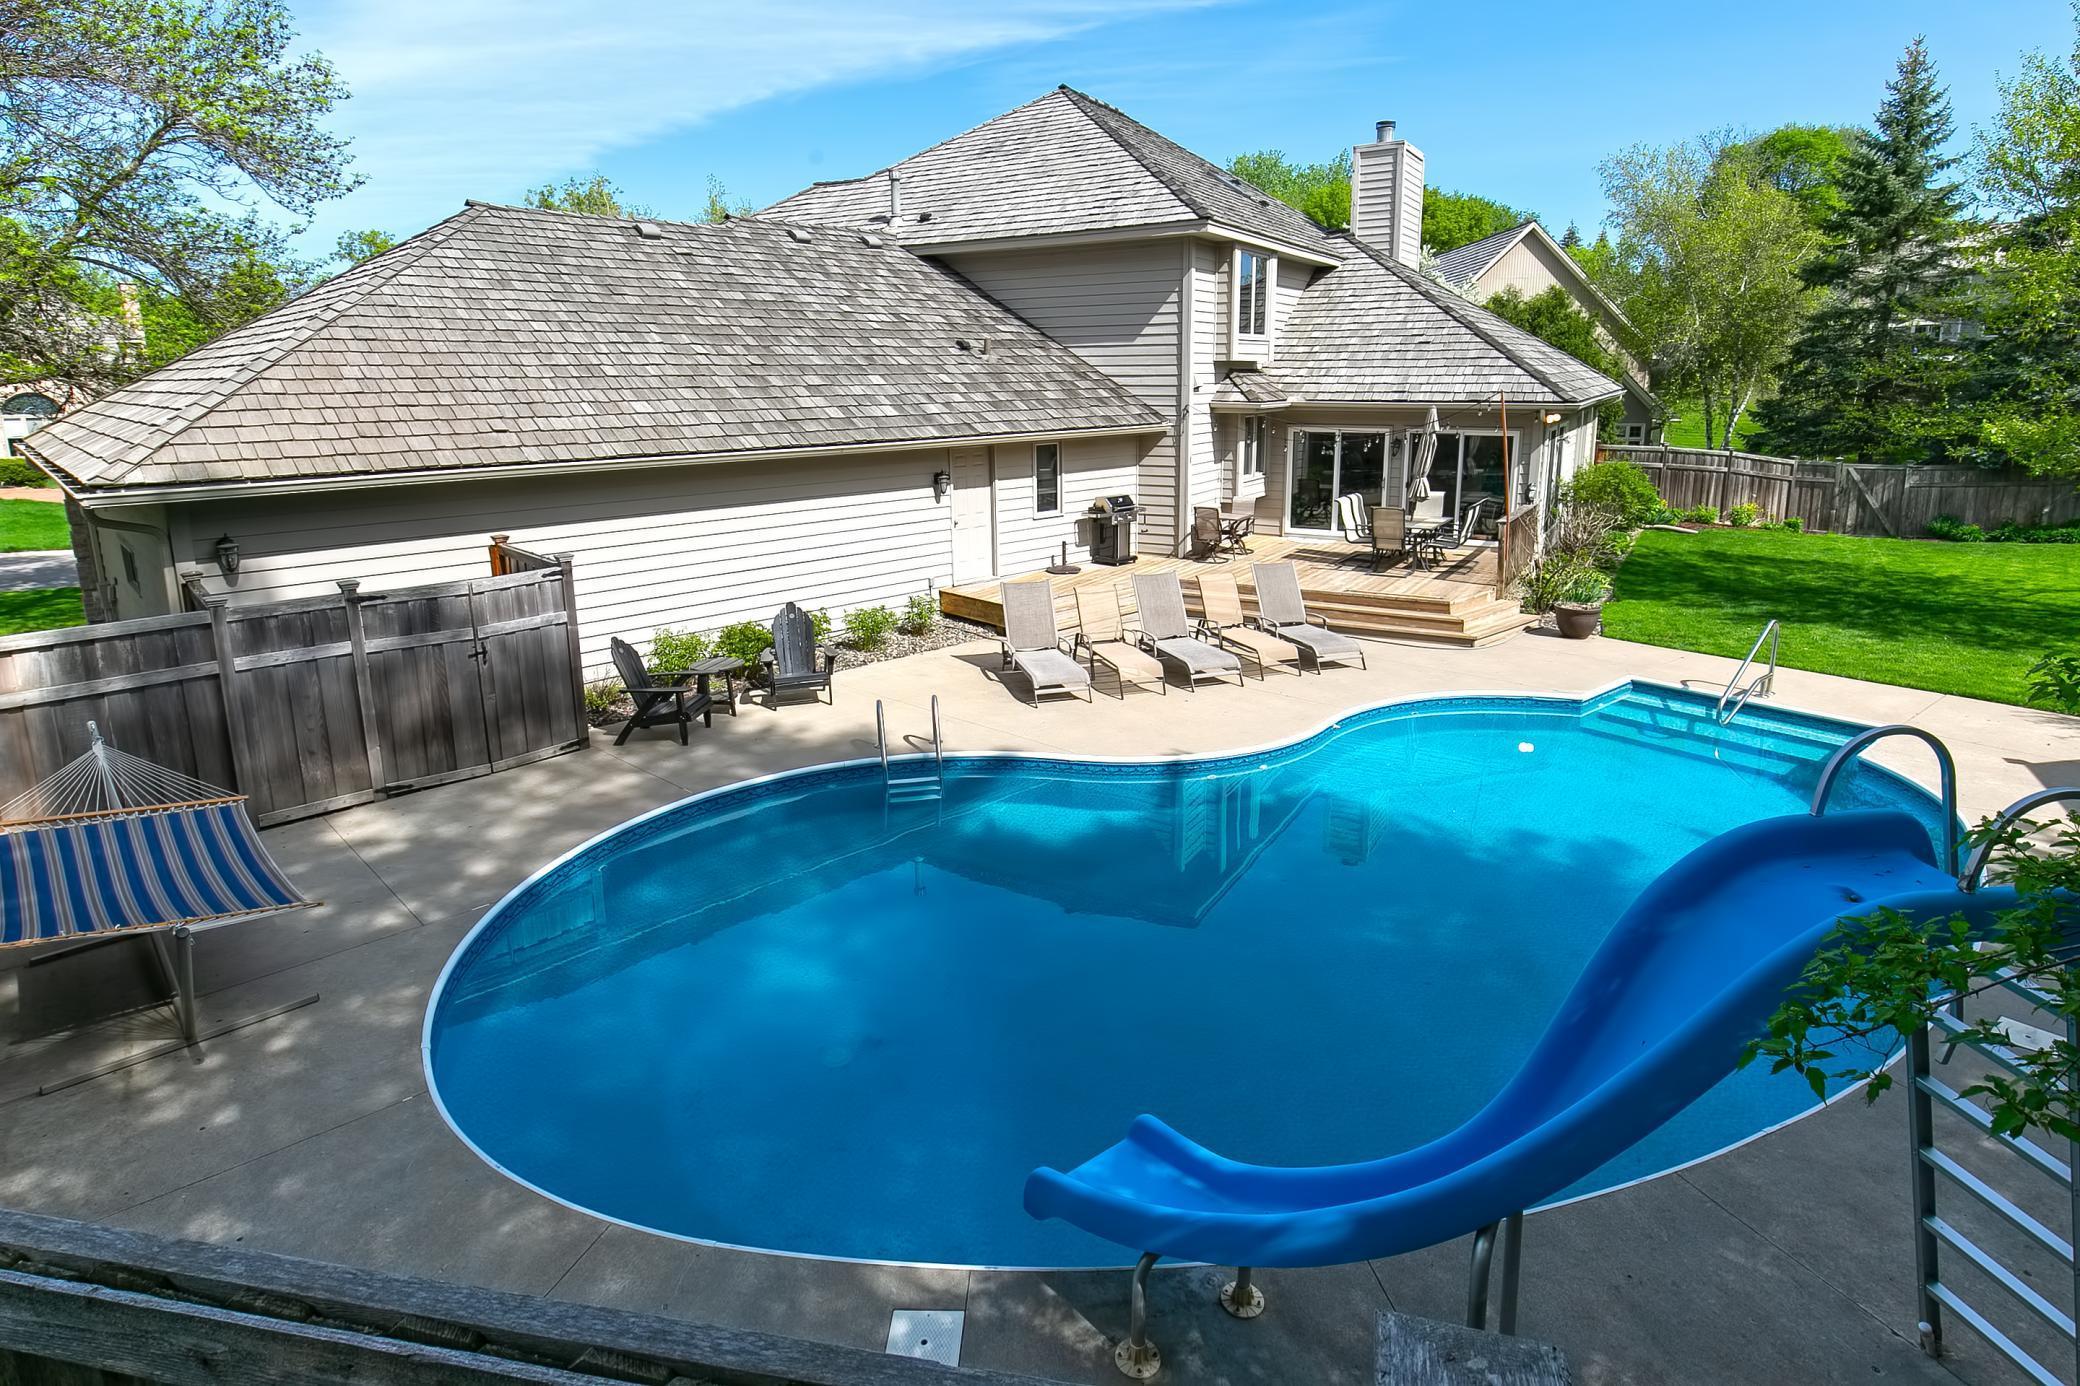 Remarkable Home!!! Check out this outdoor entertaining space with heated swimming pool, deck/patio and 3 season porch - just in time for summer!